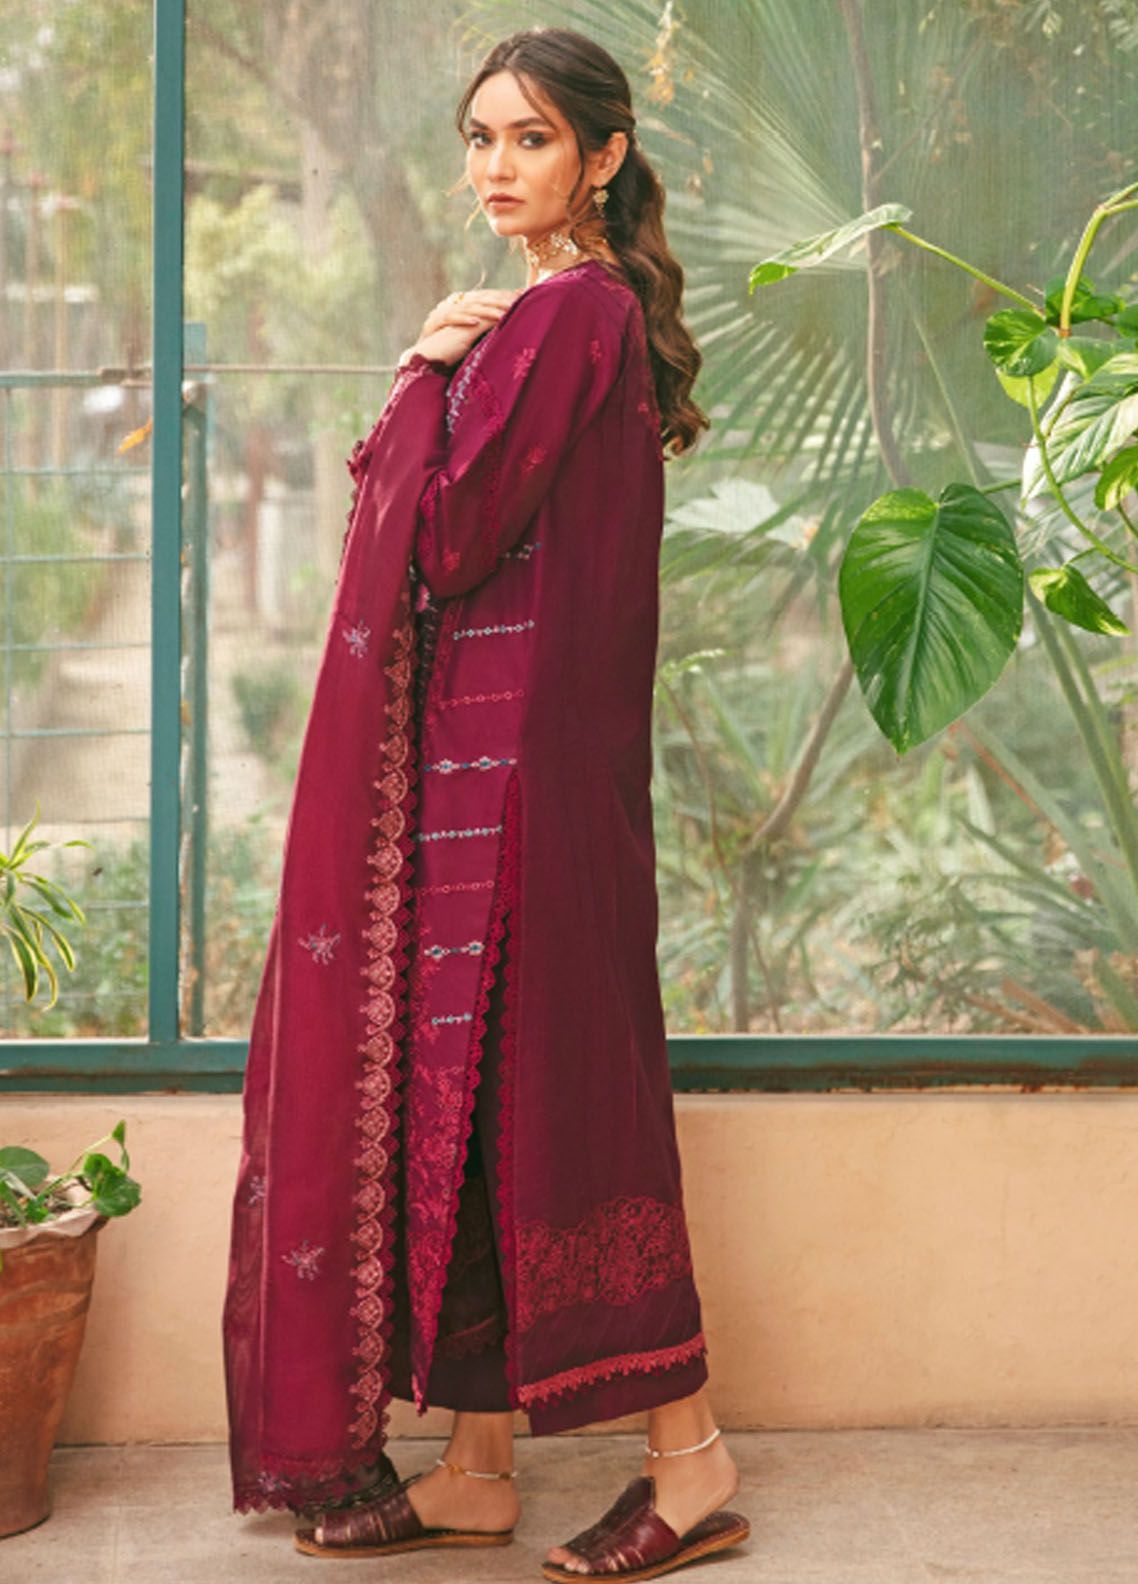 Florent Embroidered Luxury Lawn Collection